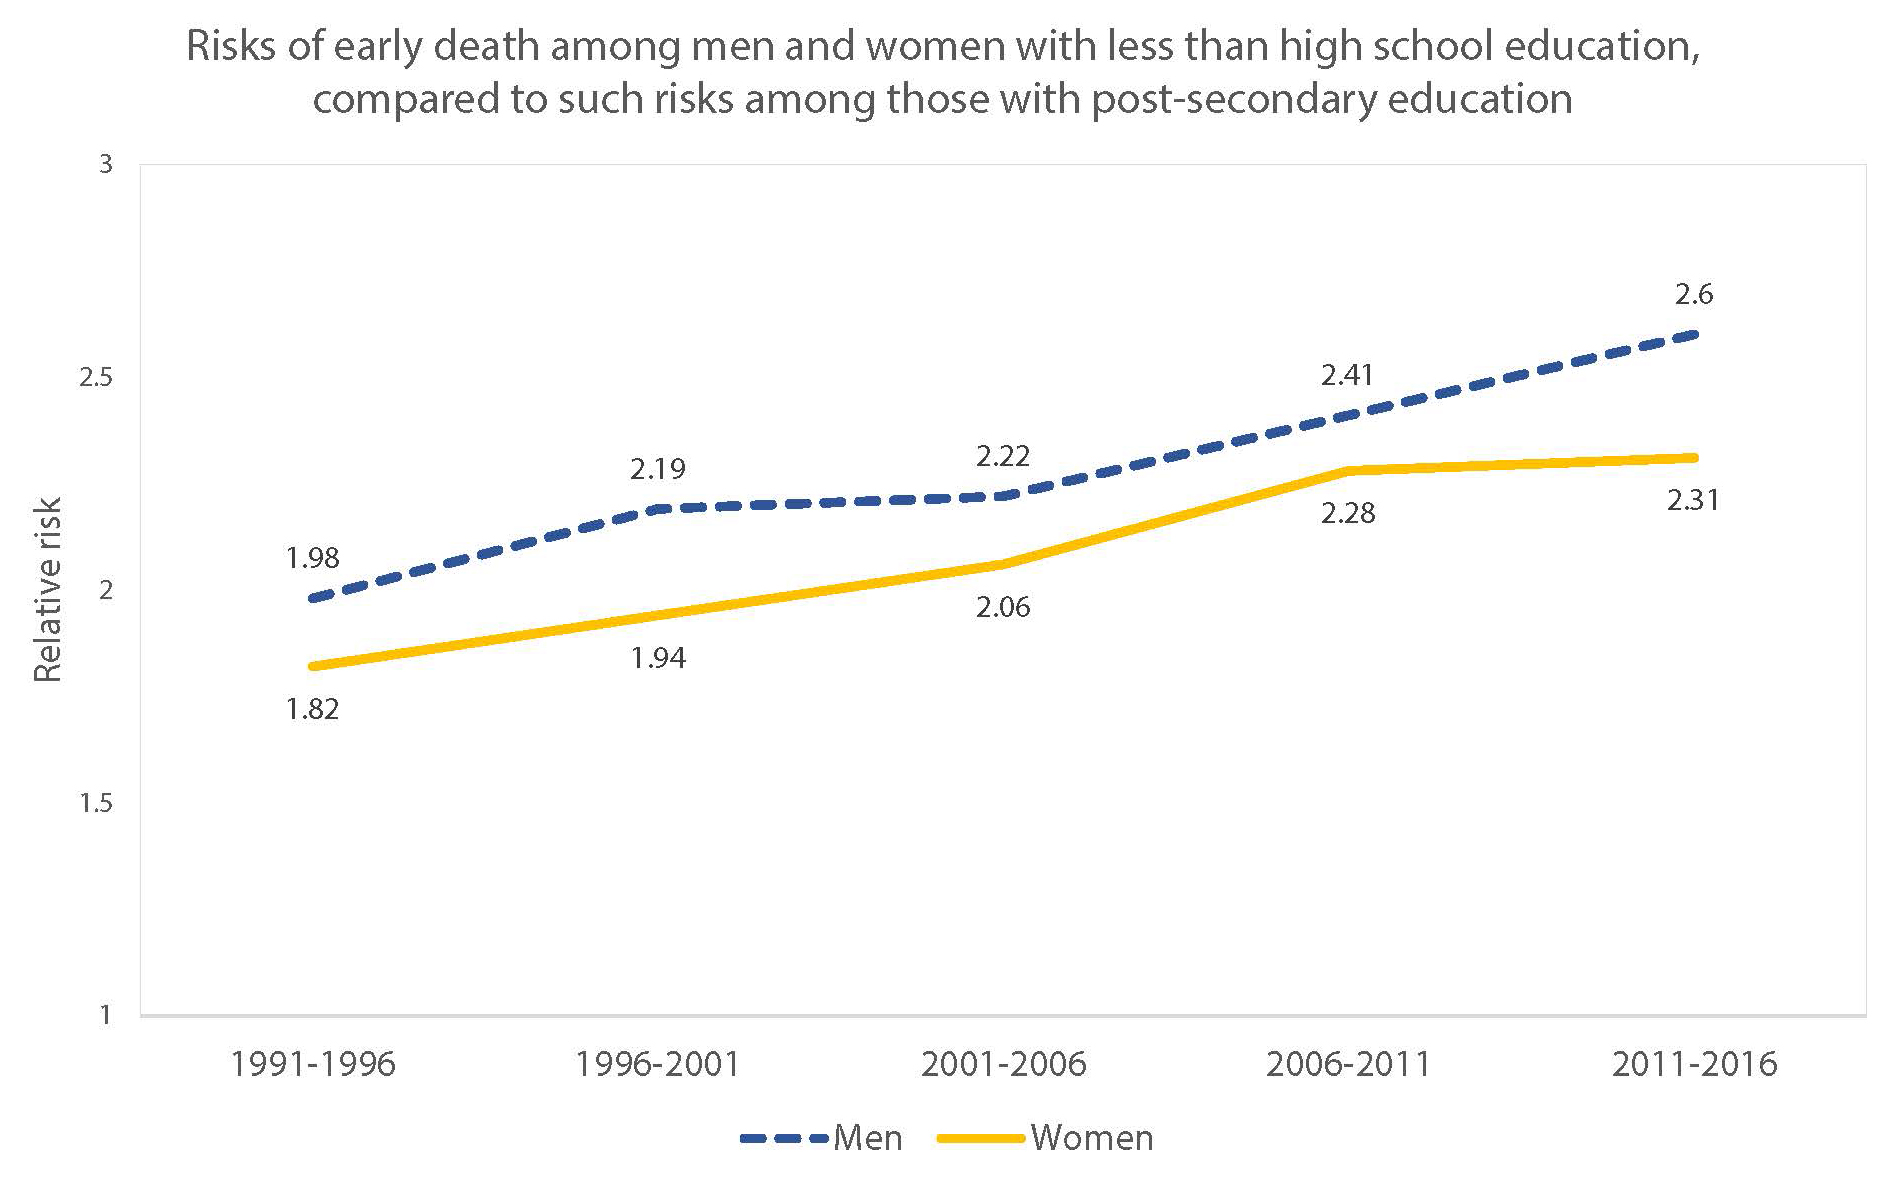 Risks of early death for women and men with less than high school education versus post-graduate education